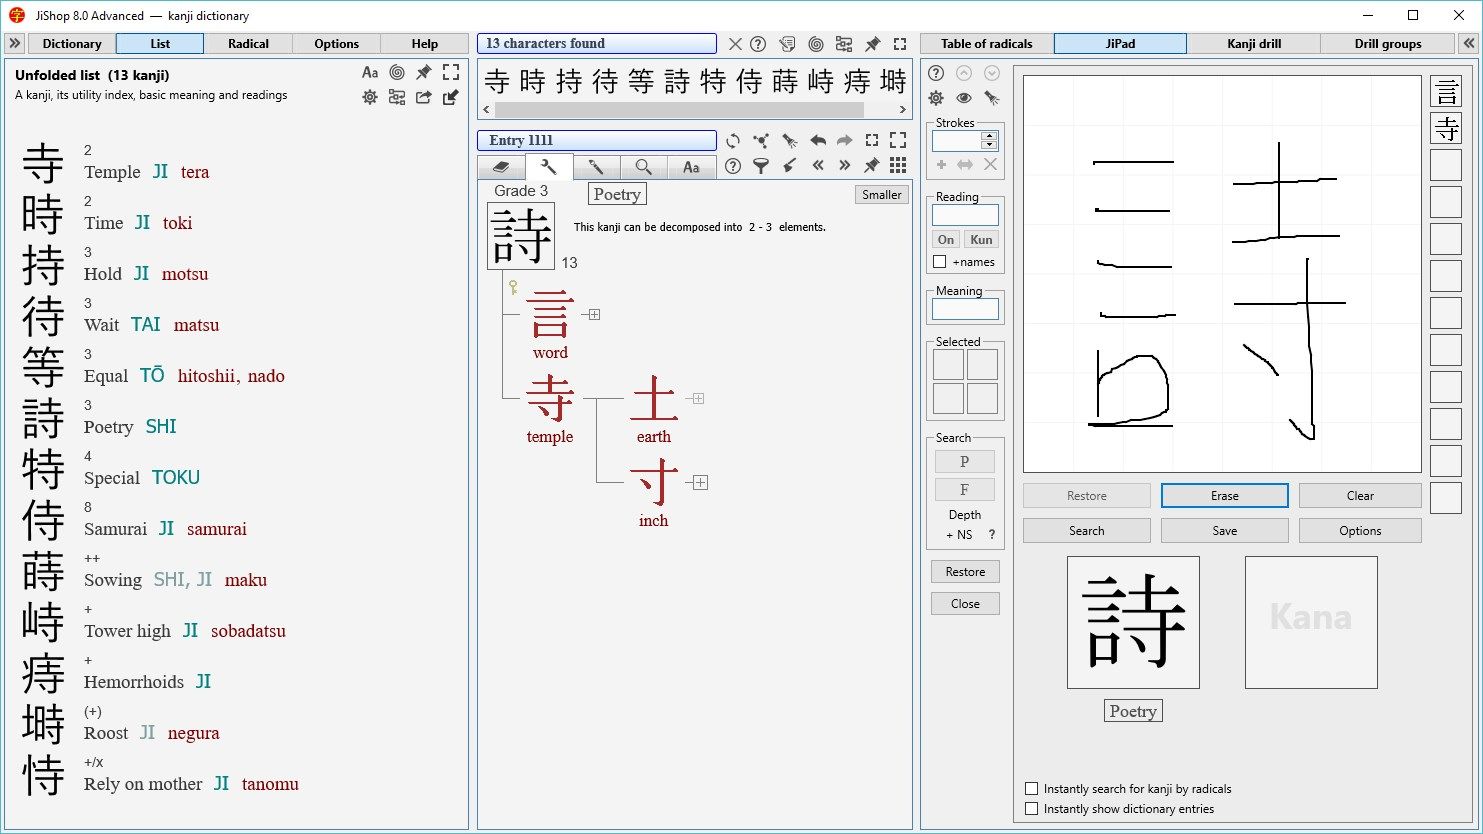 Unfolded list of search results (left), kanji decomposition (center), and  JiPad written input tool (right).